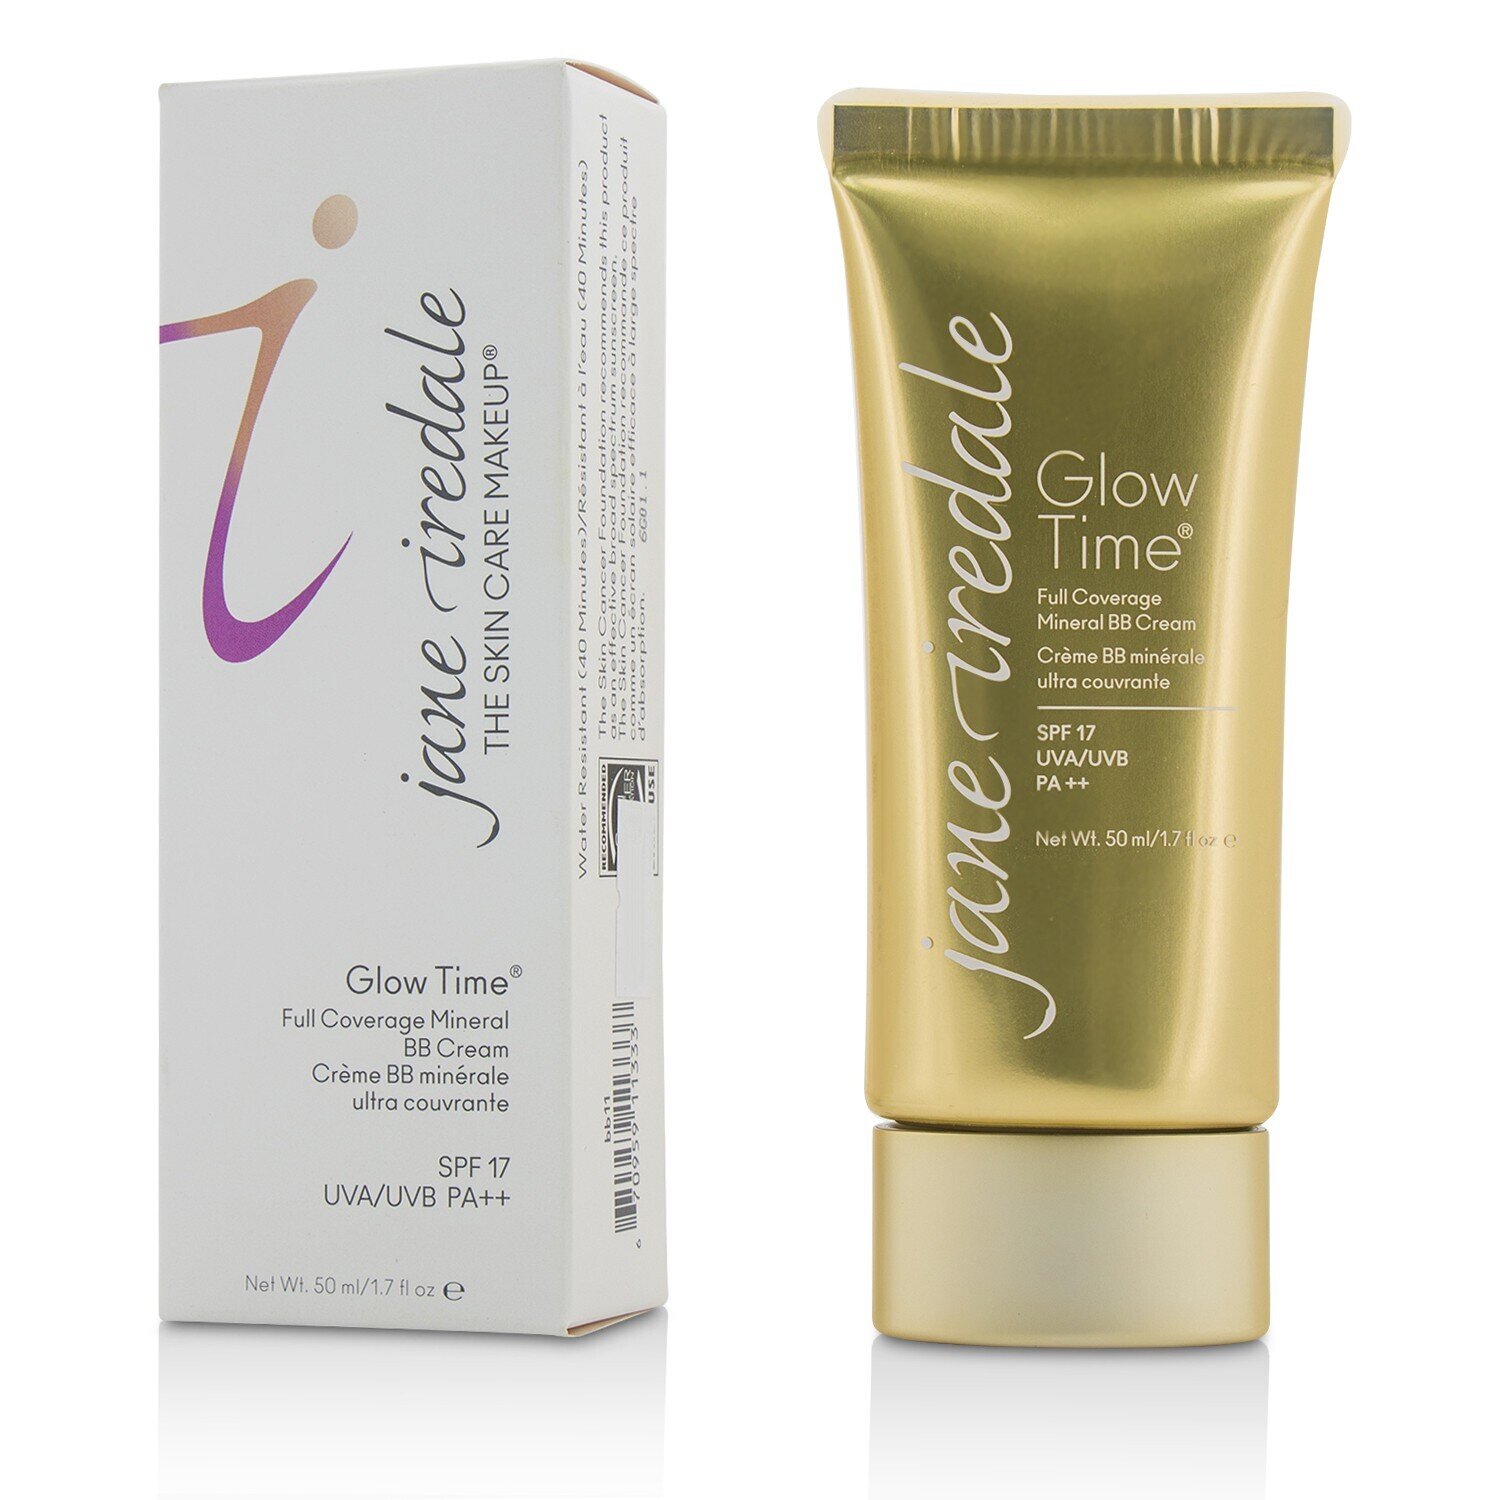 Jane Iredale Glow Time Full Coverage Mineral BB Cream SPF 17 50ml/1.7oz